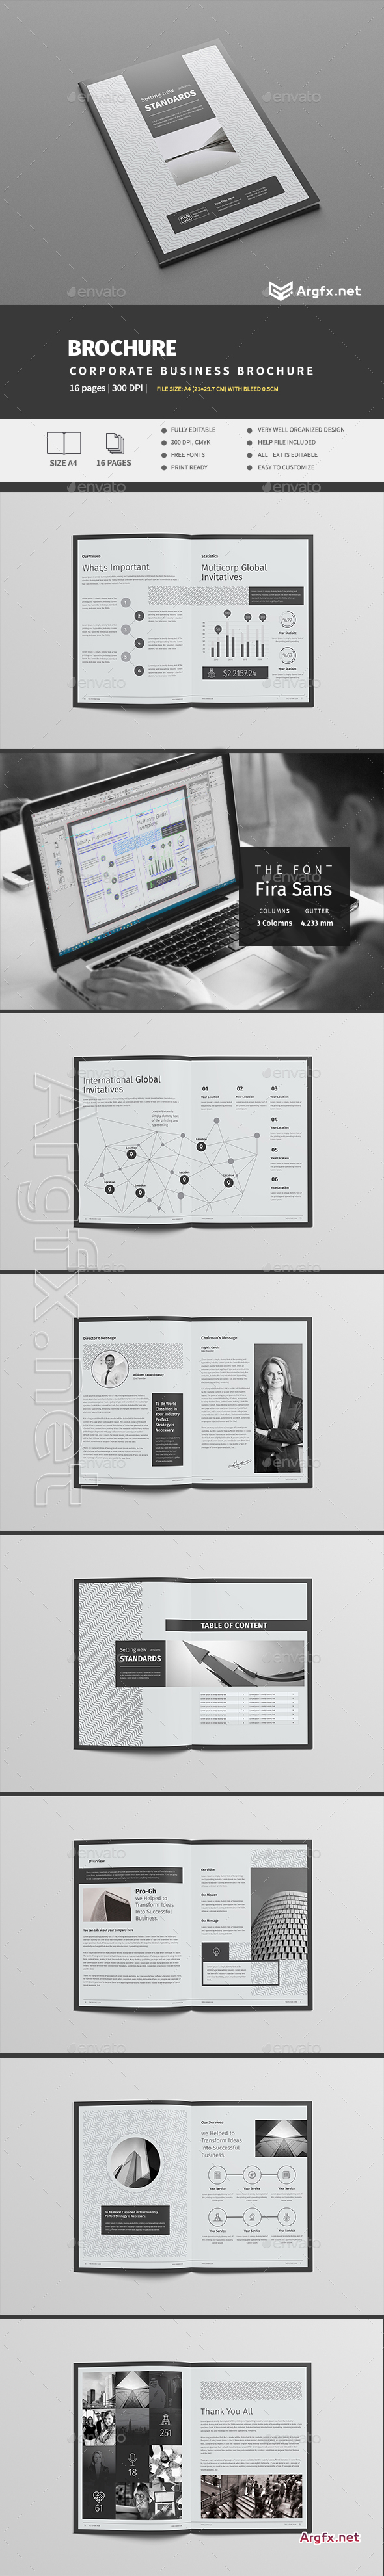 Multipurpose Brochure Template 16 Pages 15981025